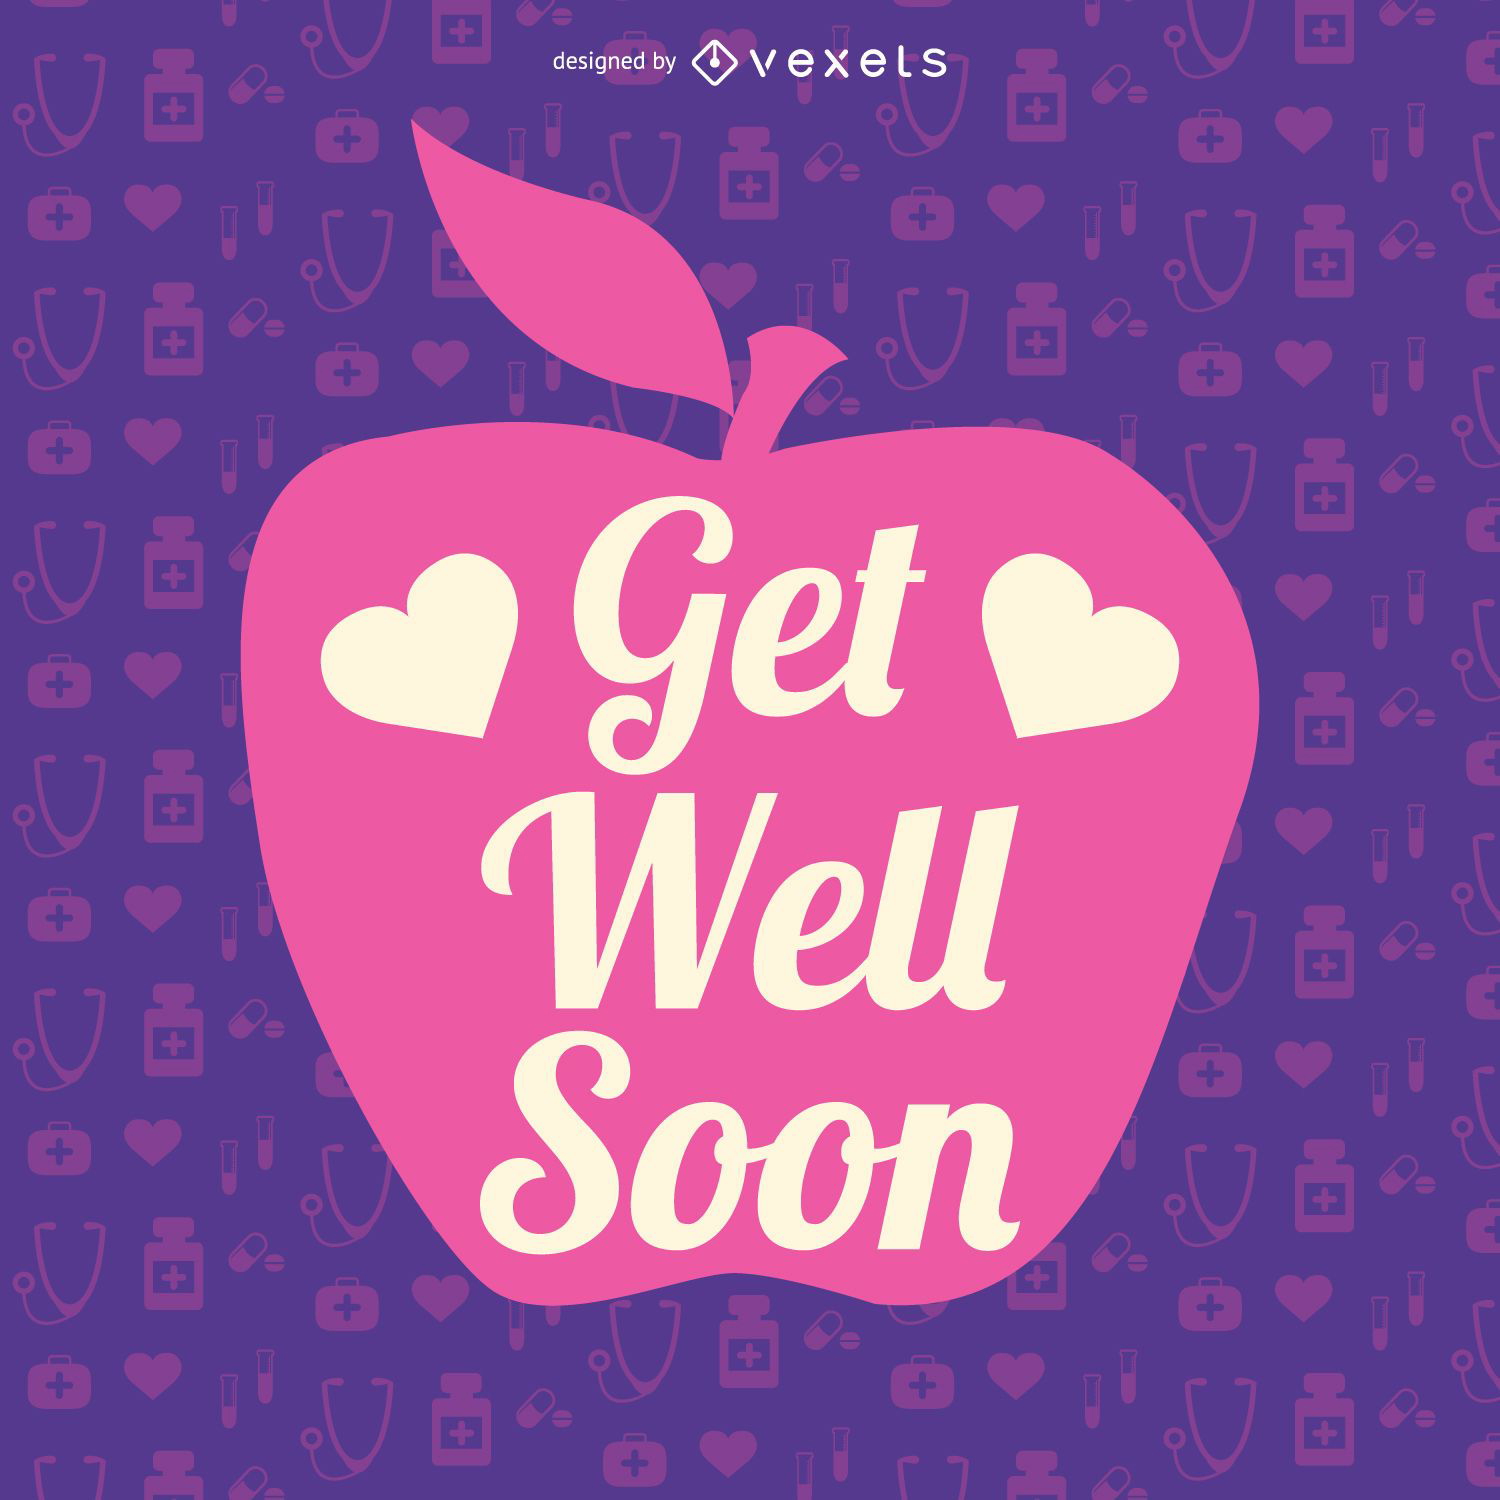 Get well soon apple message